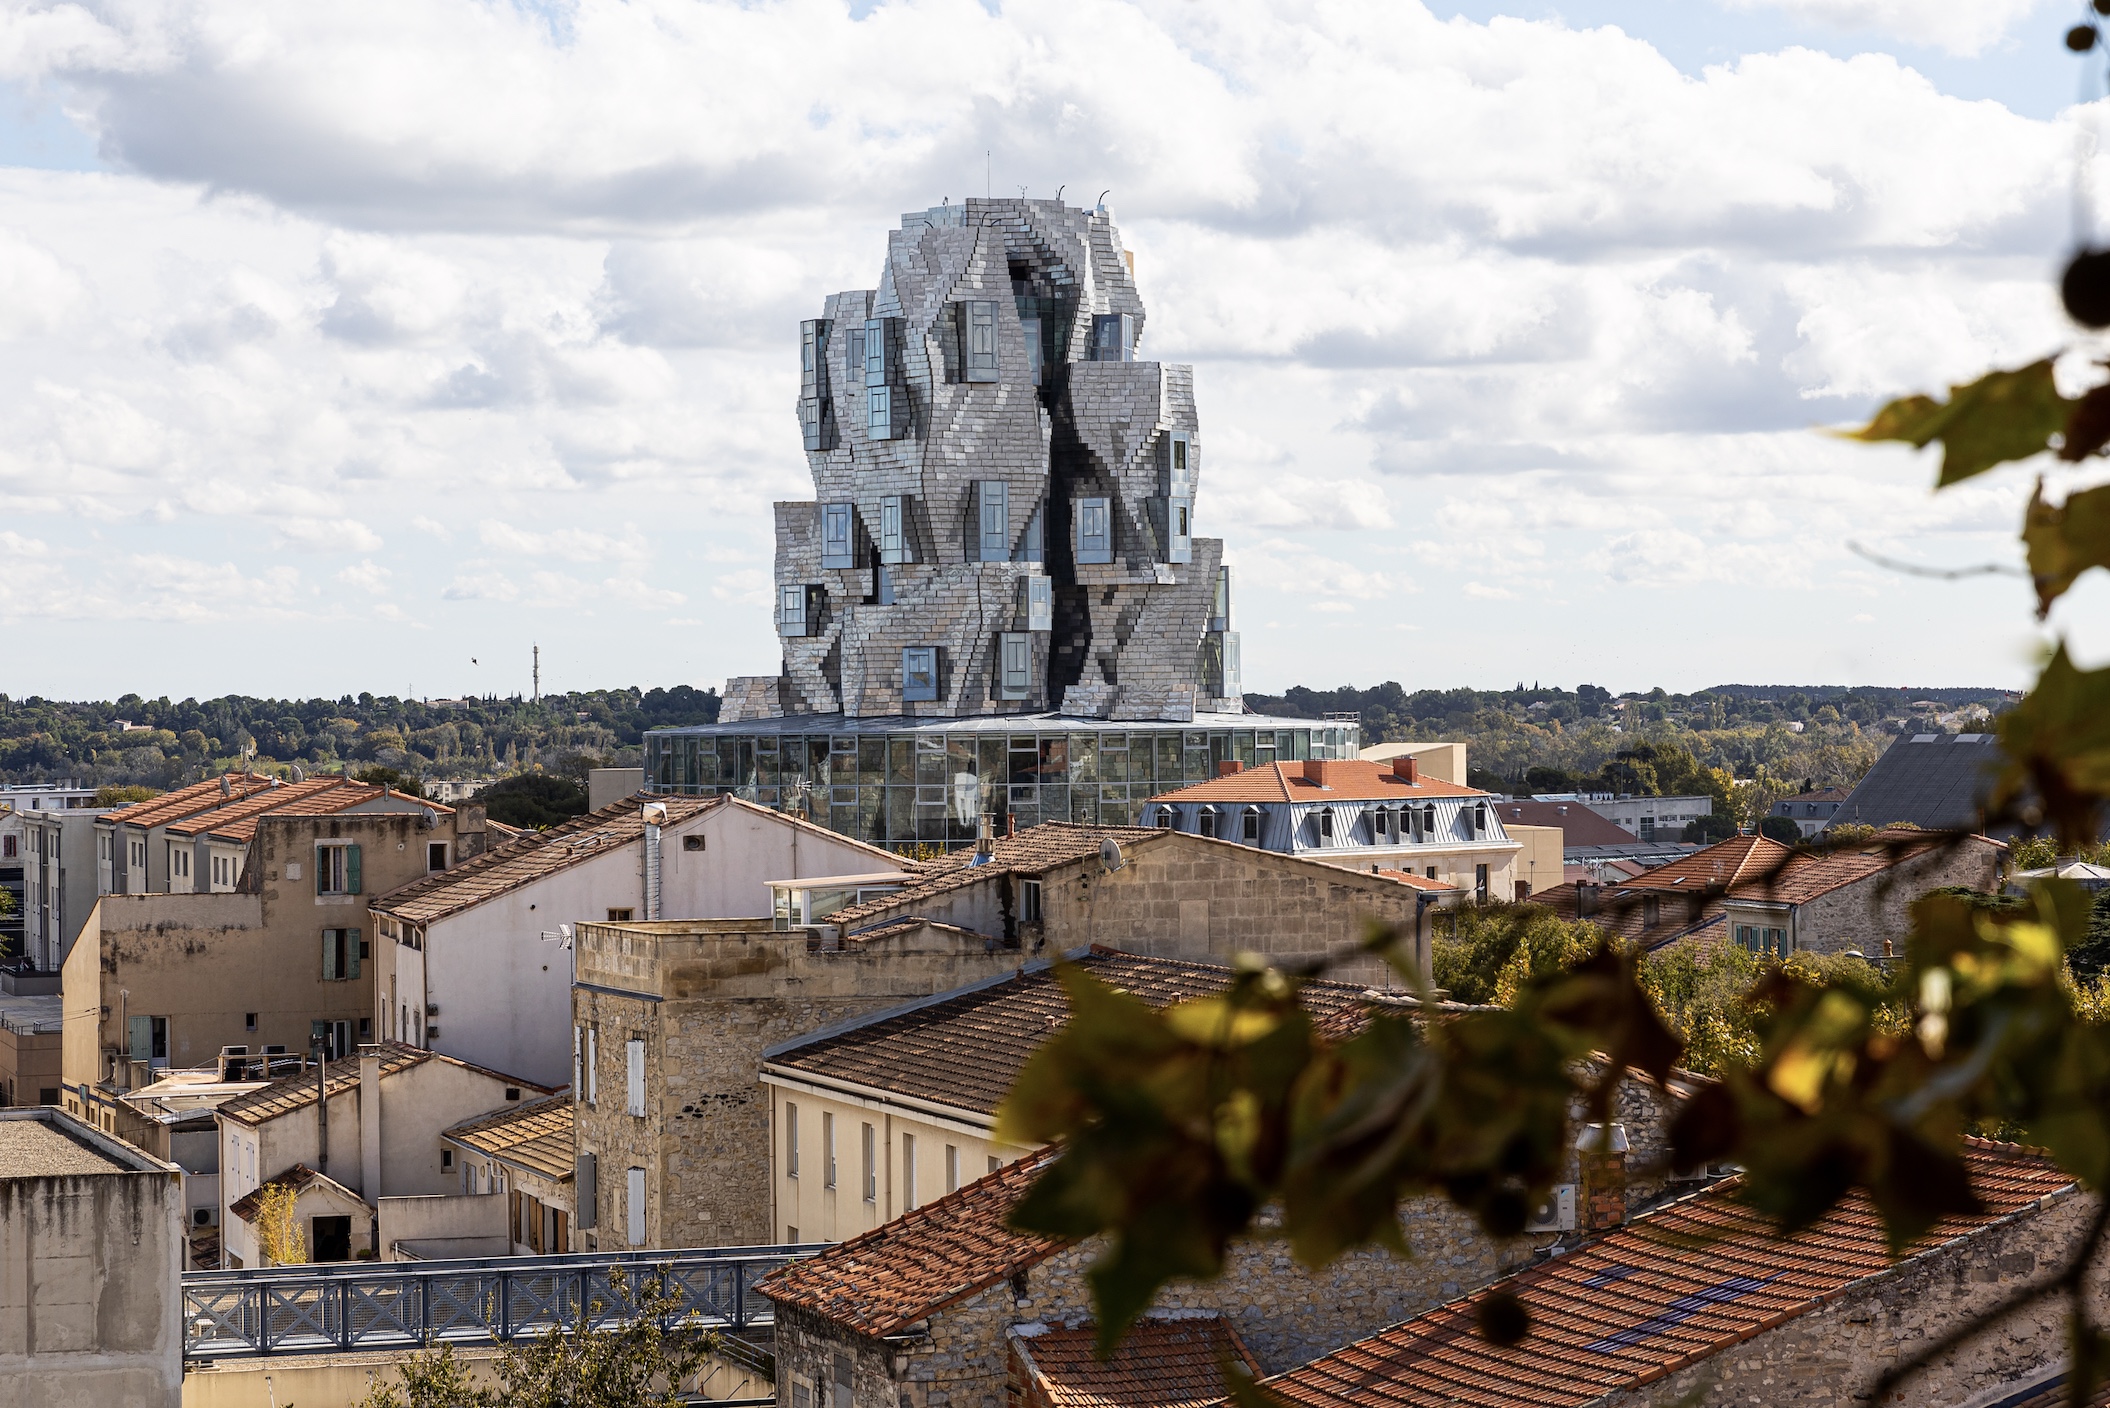 At first glance, billionaire Maja Hoffmann’s private museum in Arles looked like another vanity project.  Then it blew my mind